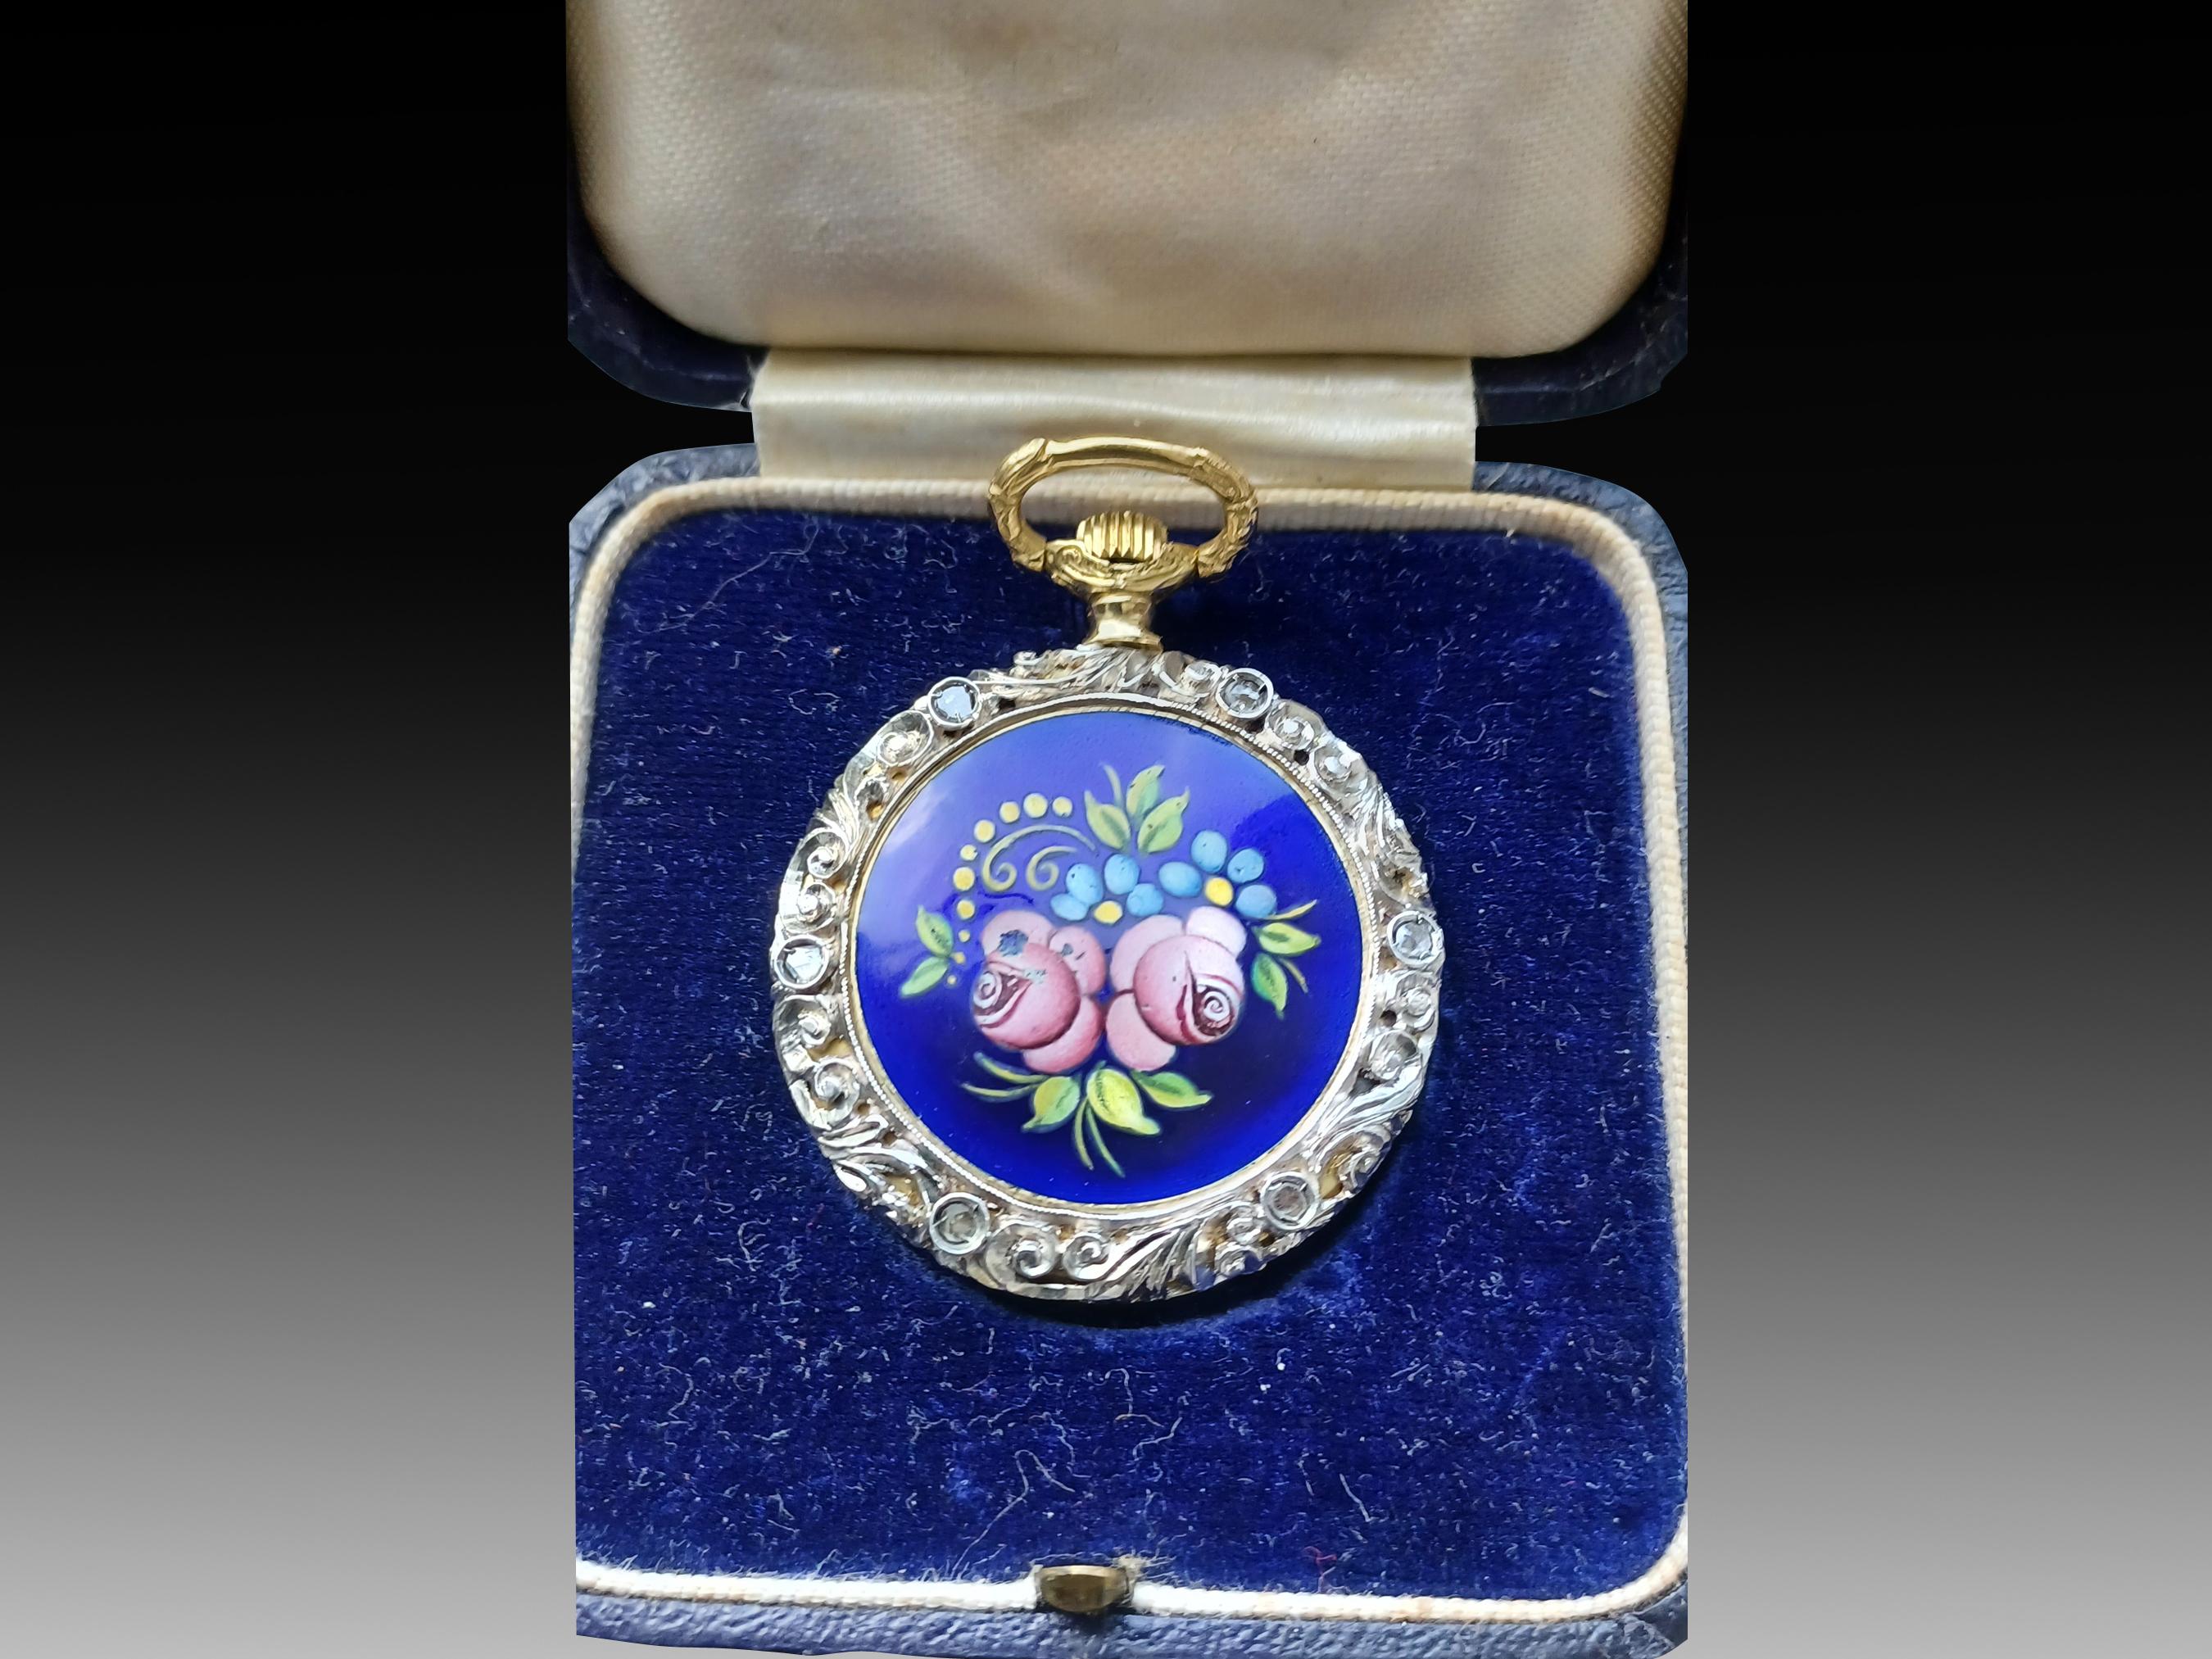 Rare 18ct Ruby and Diamond Pocket Watch with Elaborate Mountings and Jewels For Sale 2